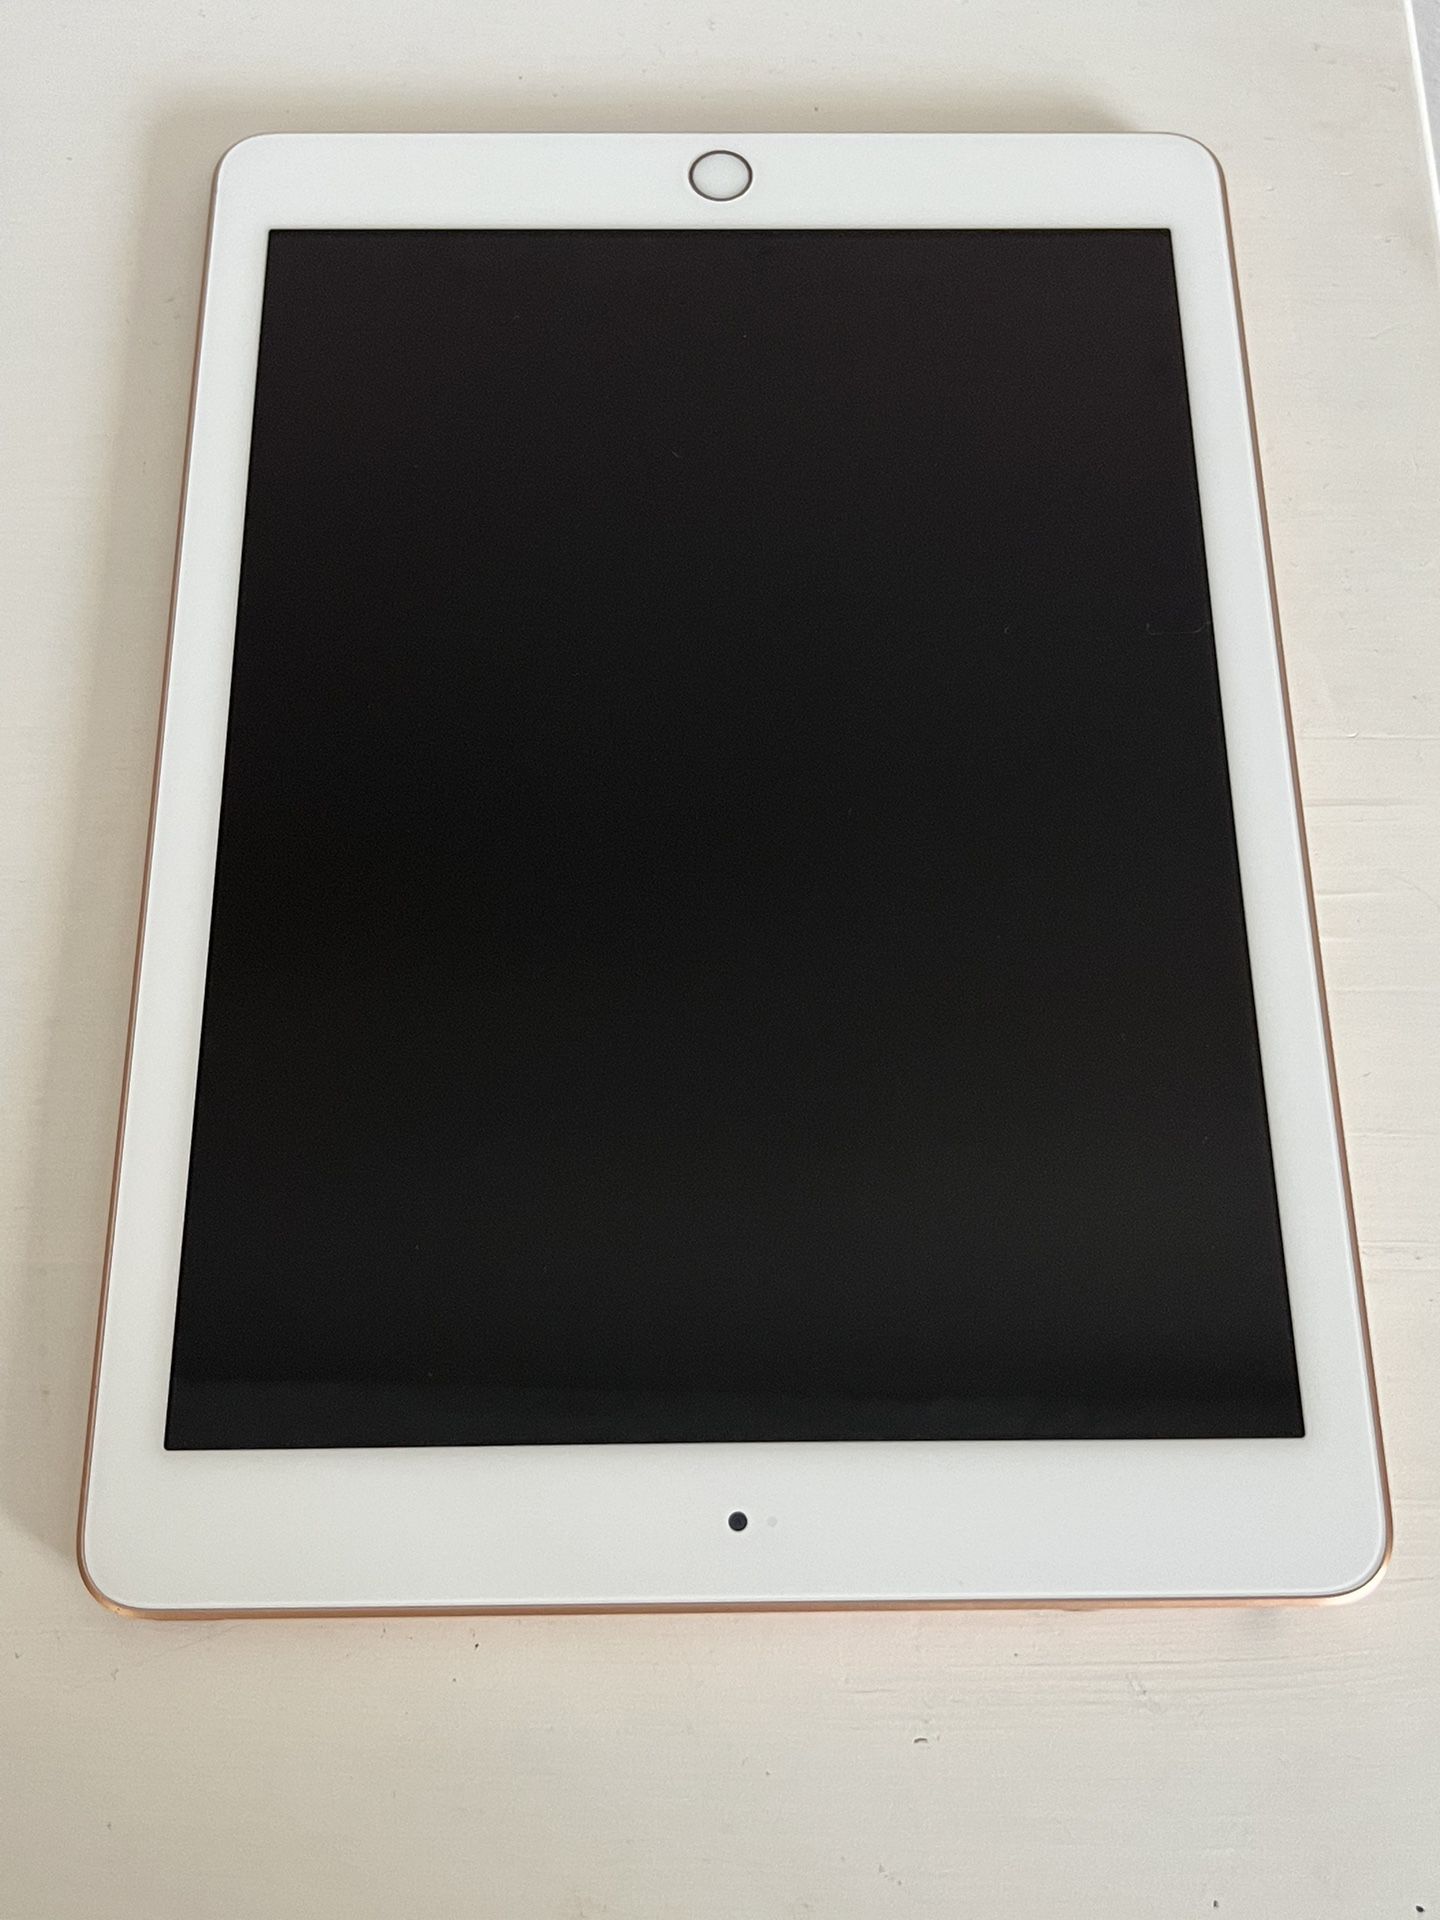 Apple - iPad 6th gen with Wi-Fi - 32GB - Gold for Sale in Medley, FL